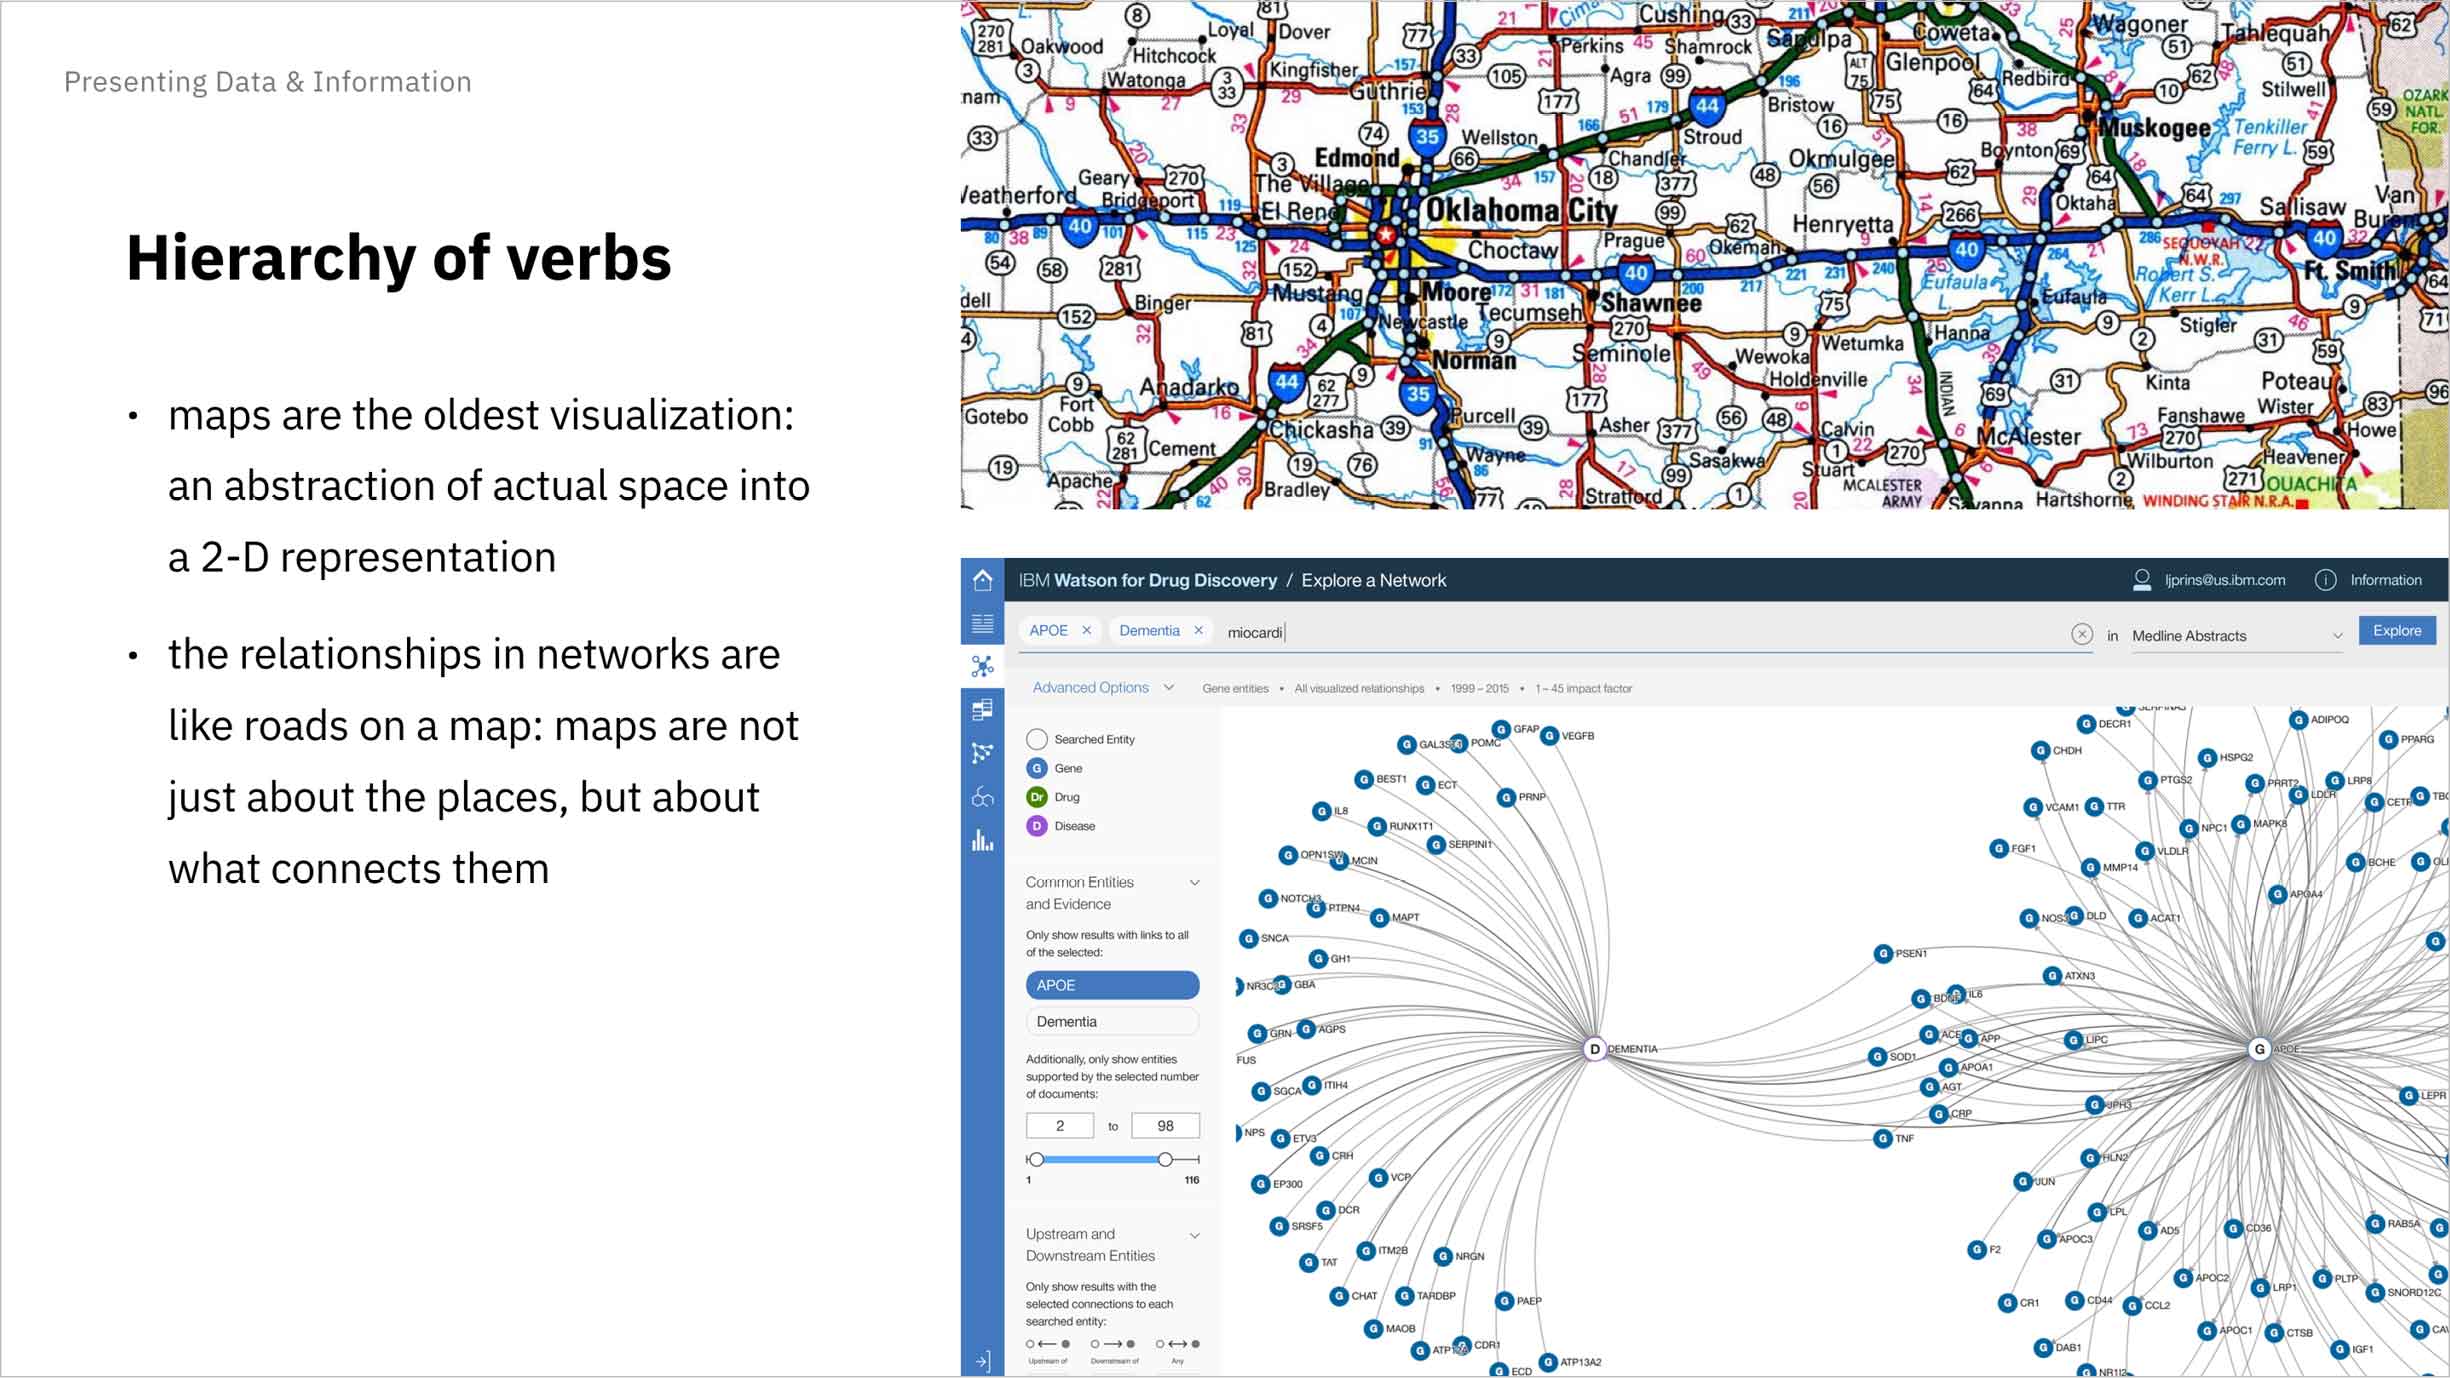 The relationships in networks are like roads on a map: maps are not just about the places, but about what connects them.